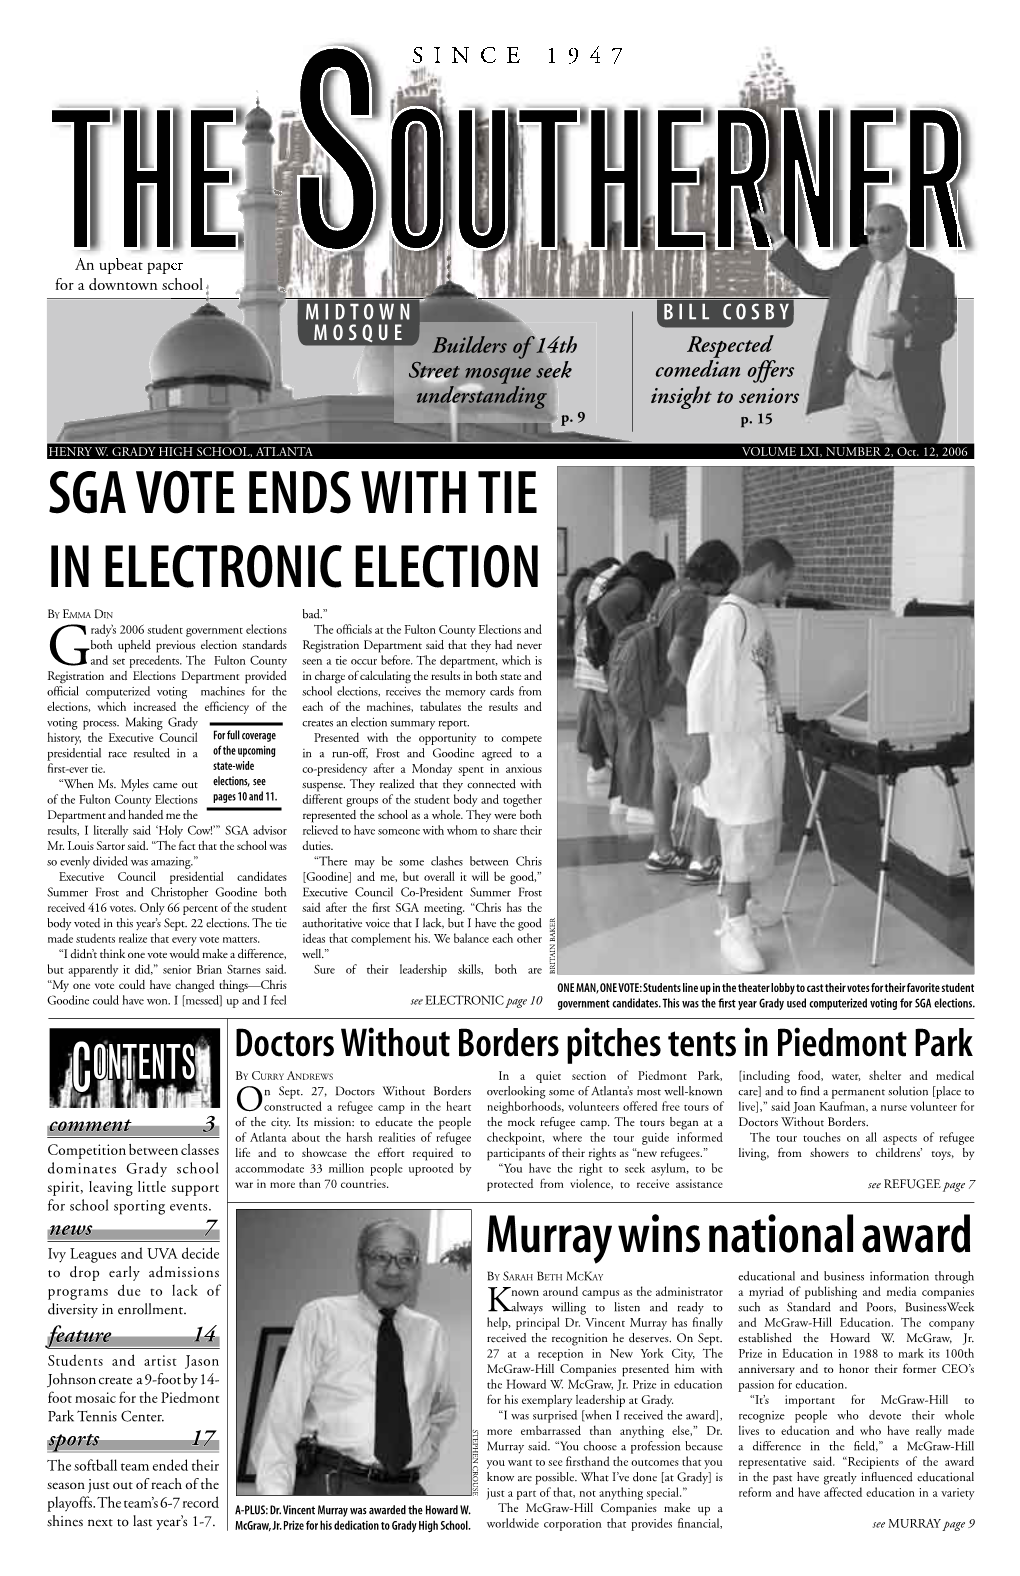 Sga Vote Ends with Tie in Electronic Election